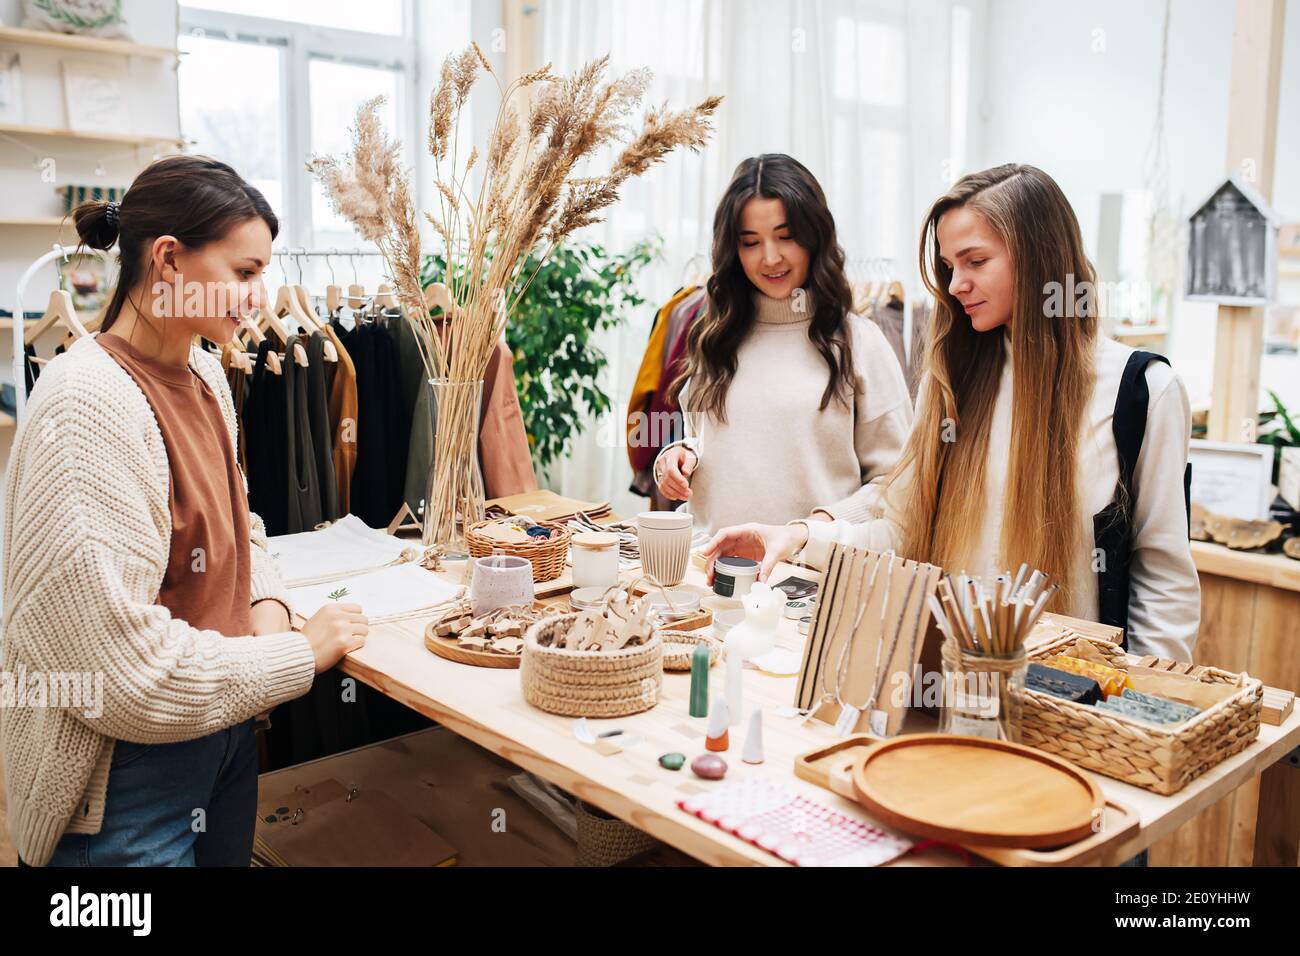 Chatting women in eco shop picking and discussing various cosmetic products Stock Photo